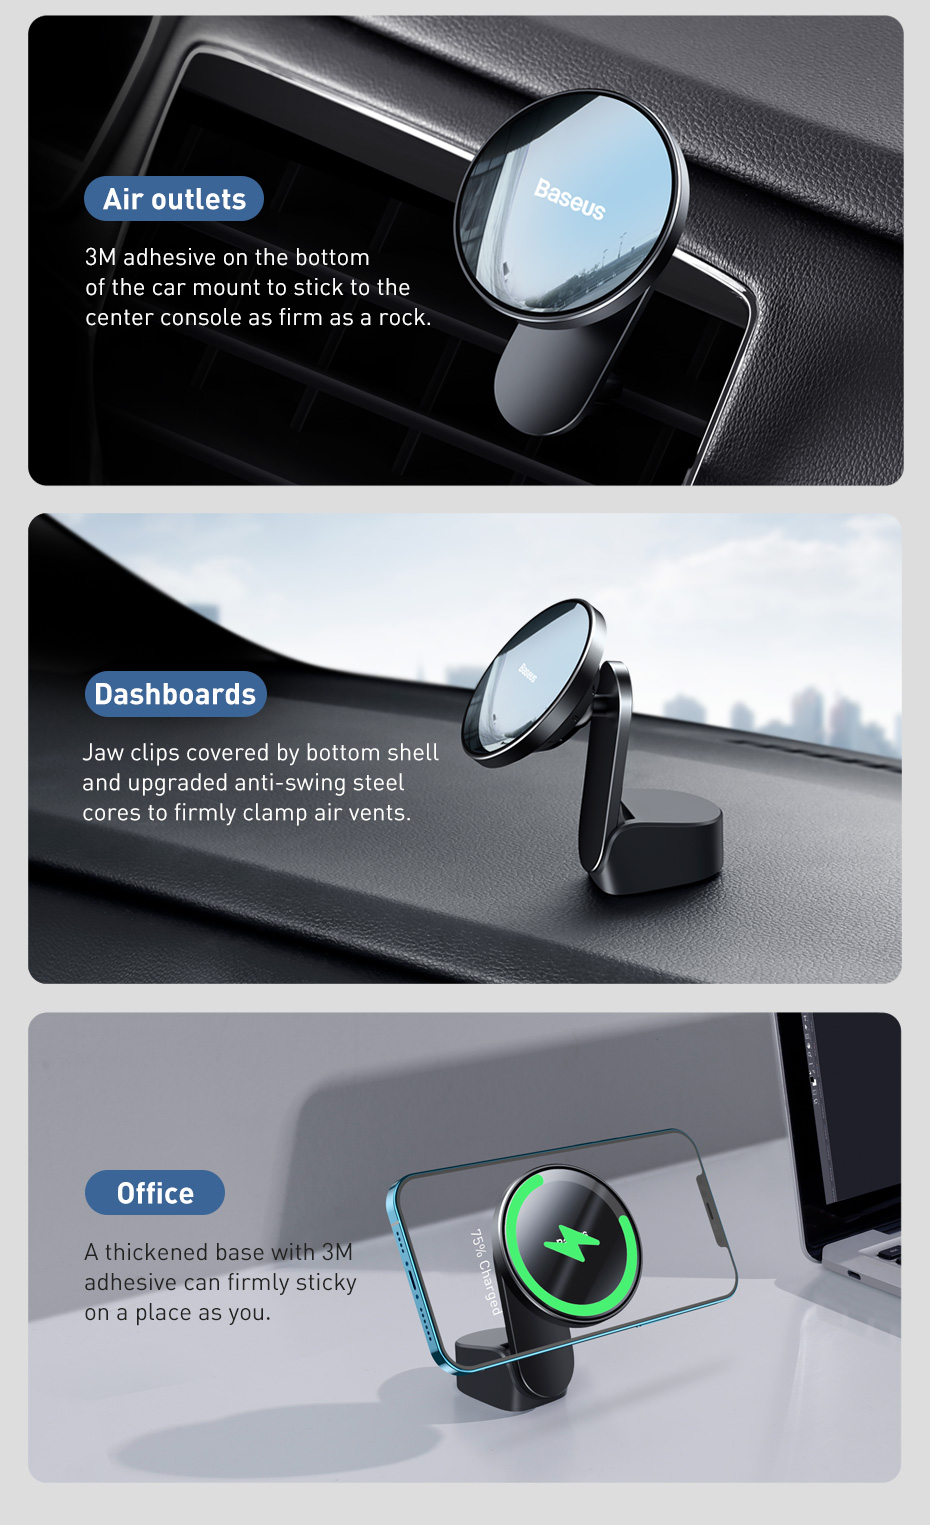 Baseus-Magnetic-15W-Qi-Wireless-Charger-Automatic-Clamping-Air-Vent-Dashboard-Car-Phone-Holder-Car-M-1835357-9